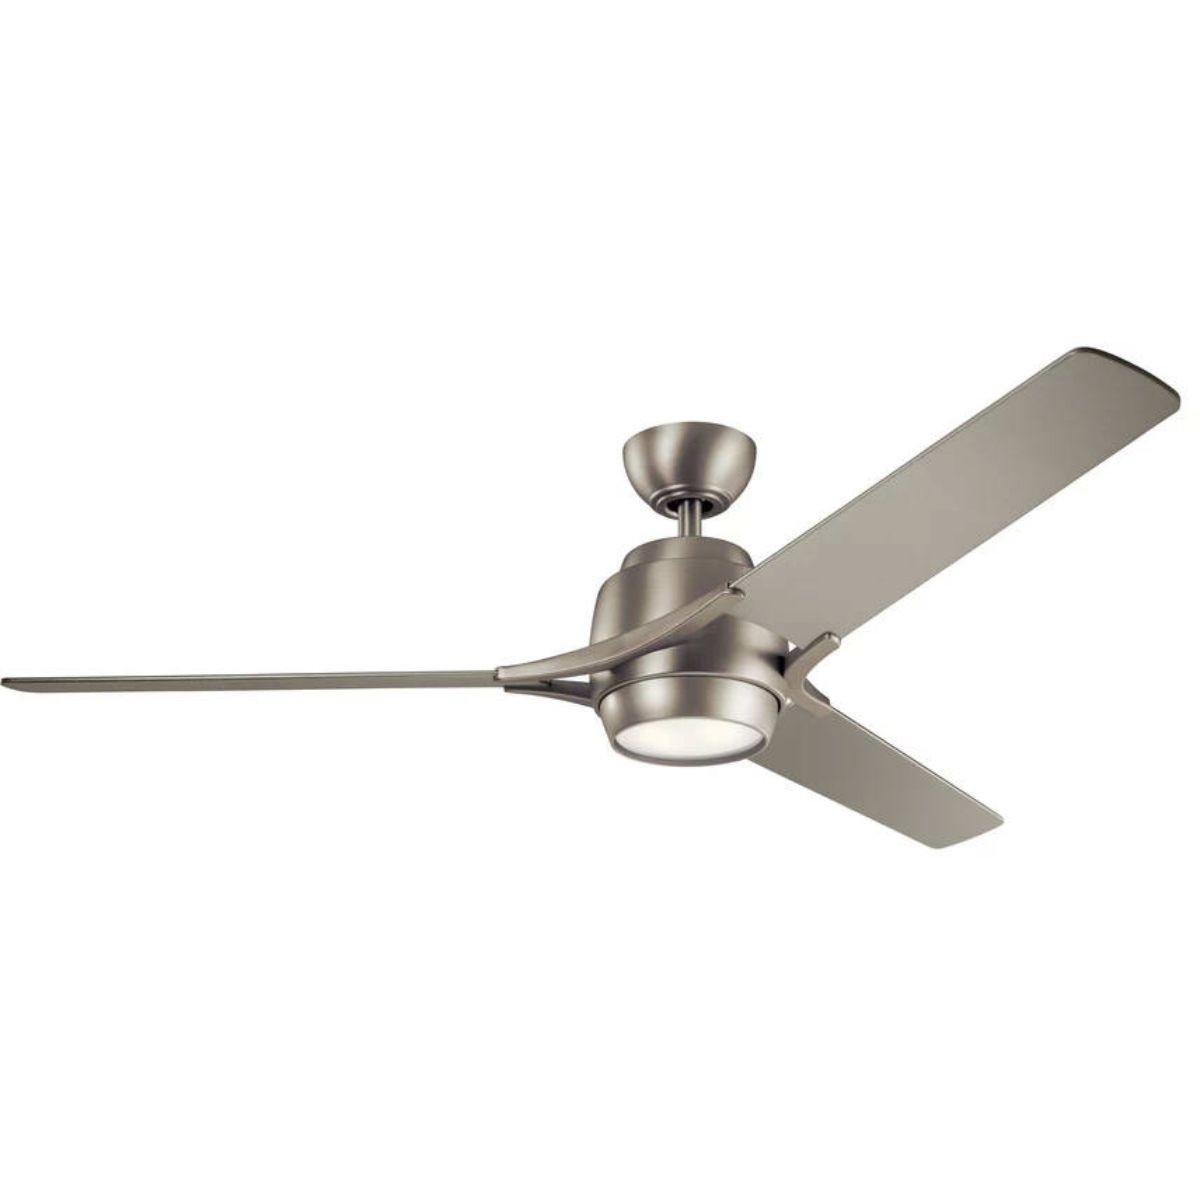 Zeus 60 Inch Modern Ceiling Fan With Light, Wall Control Included